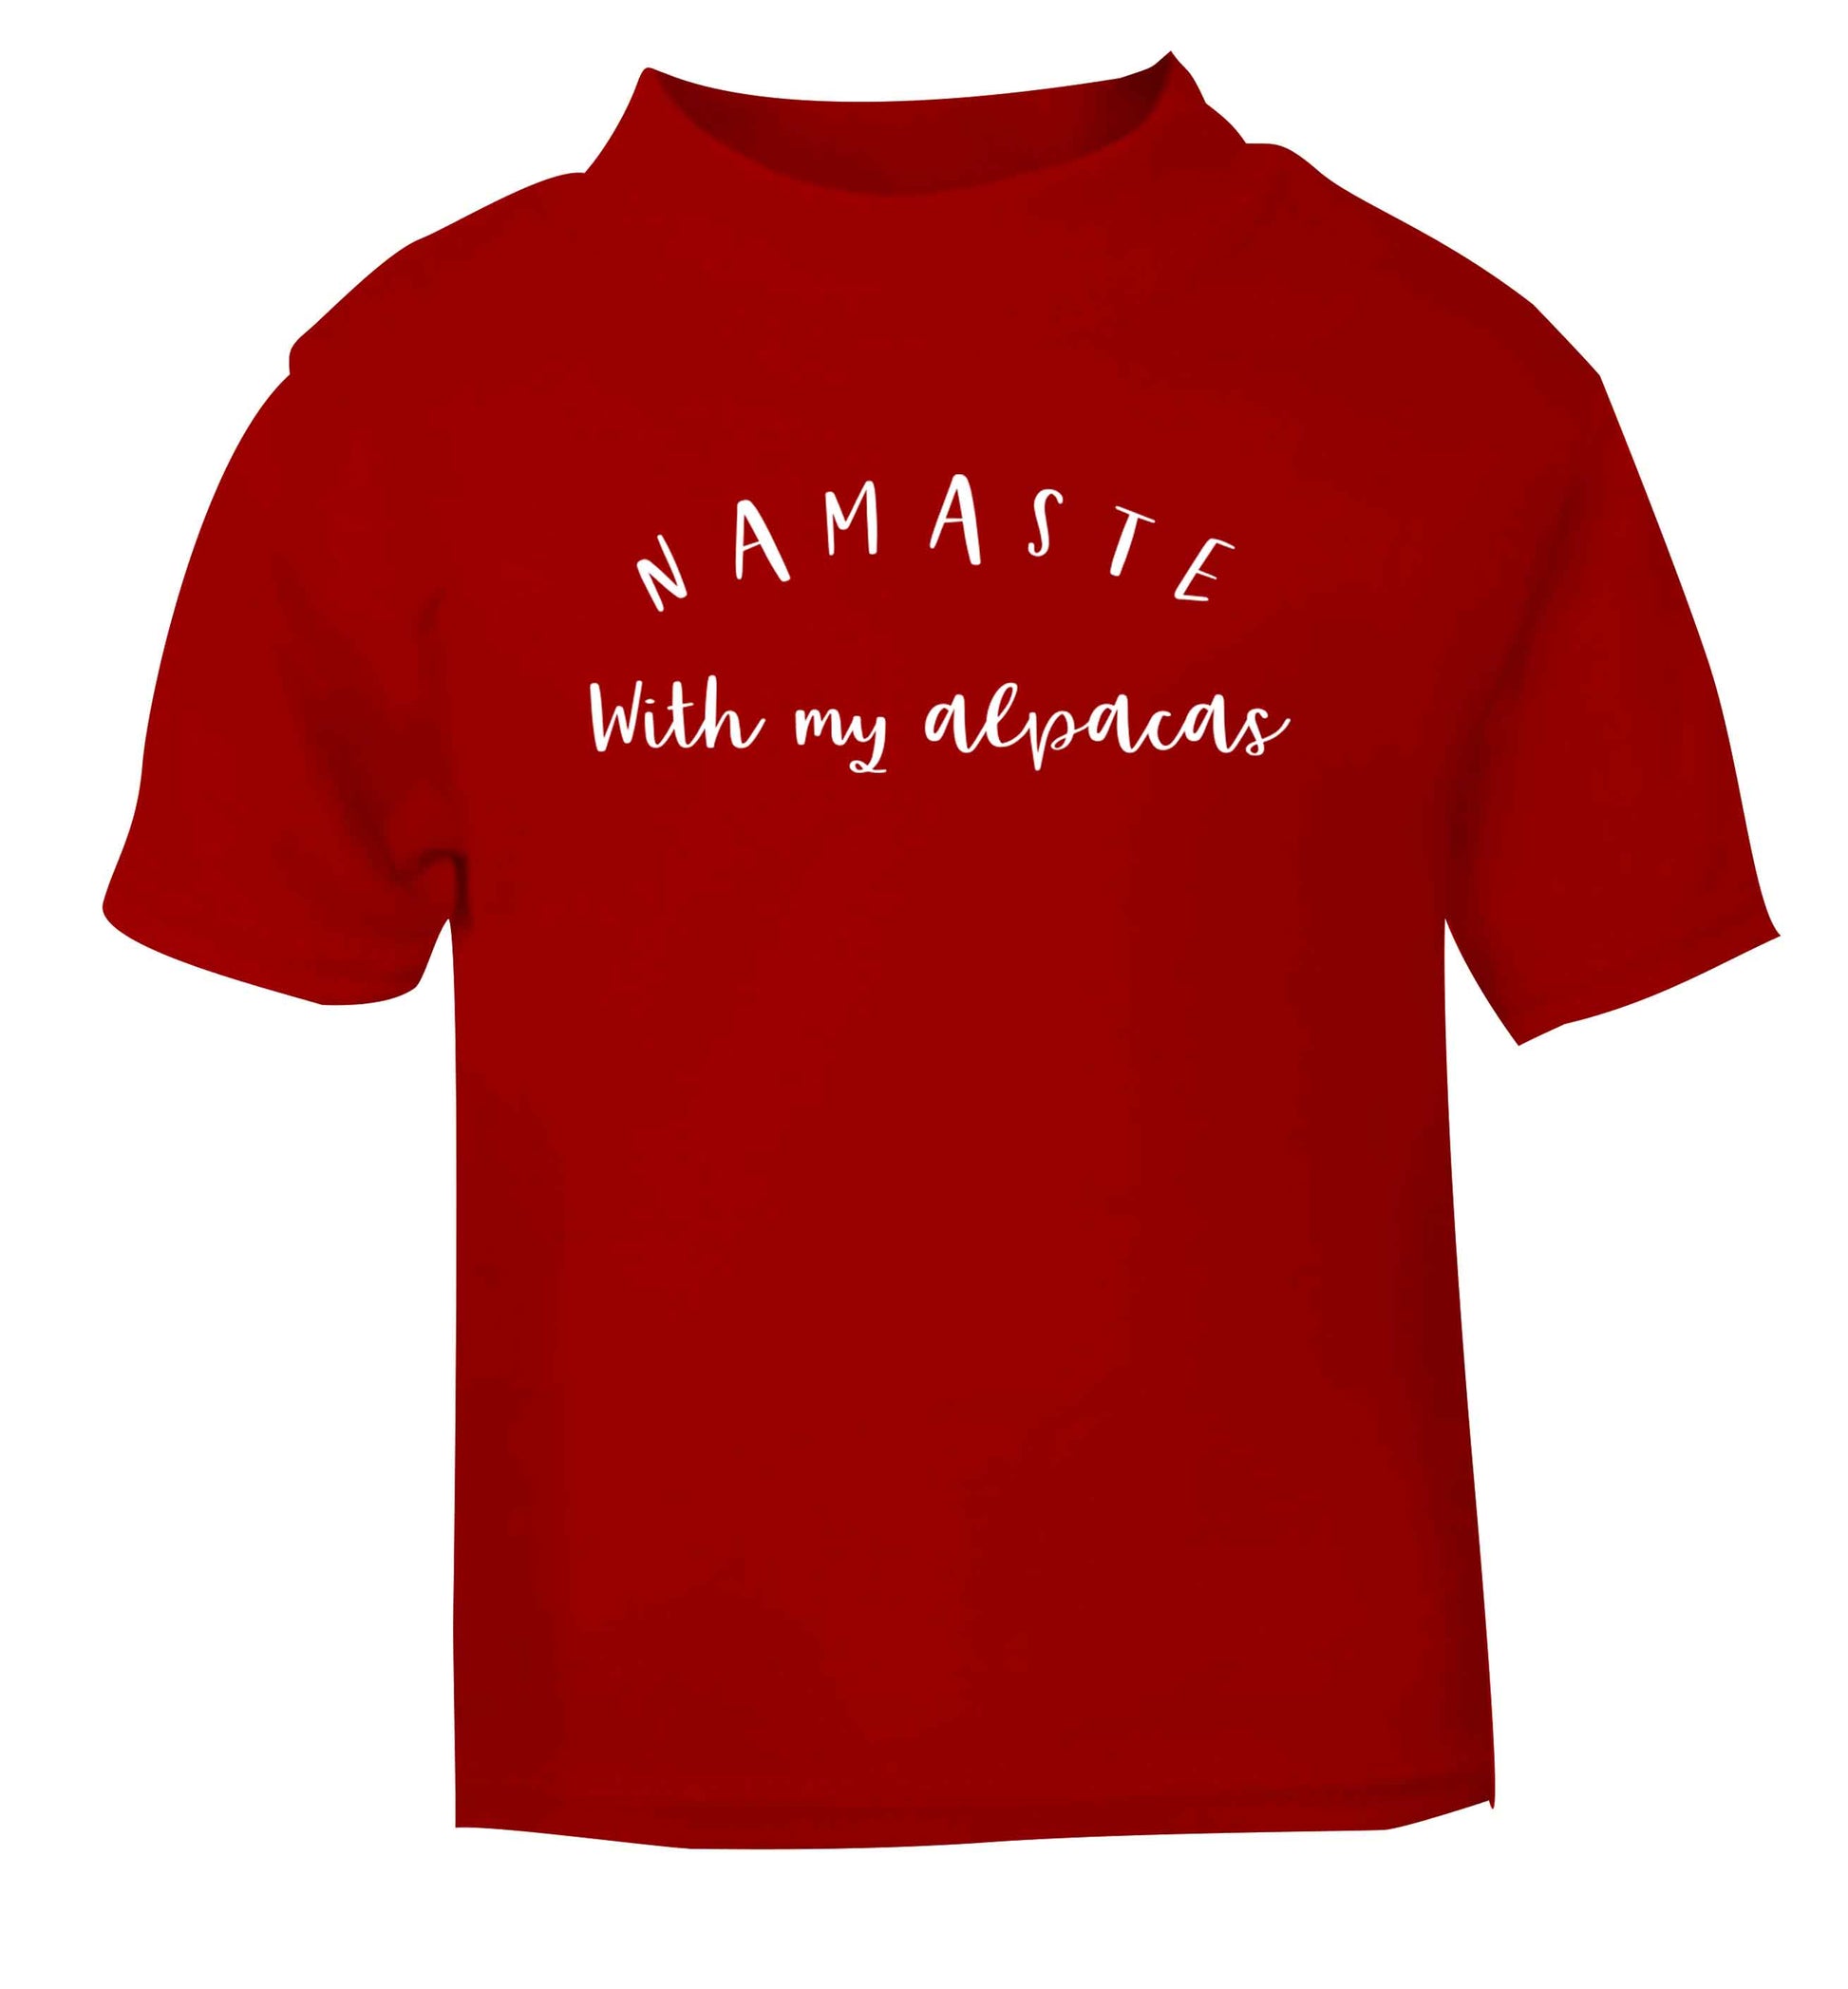 Namaste with my alpacas red Baby Toddler Tshirt 2 Years